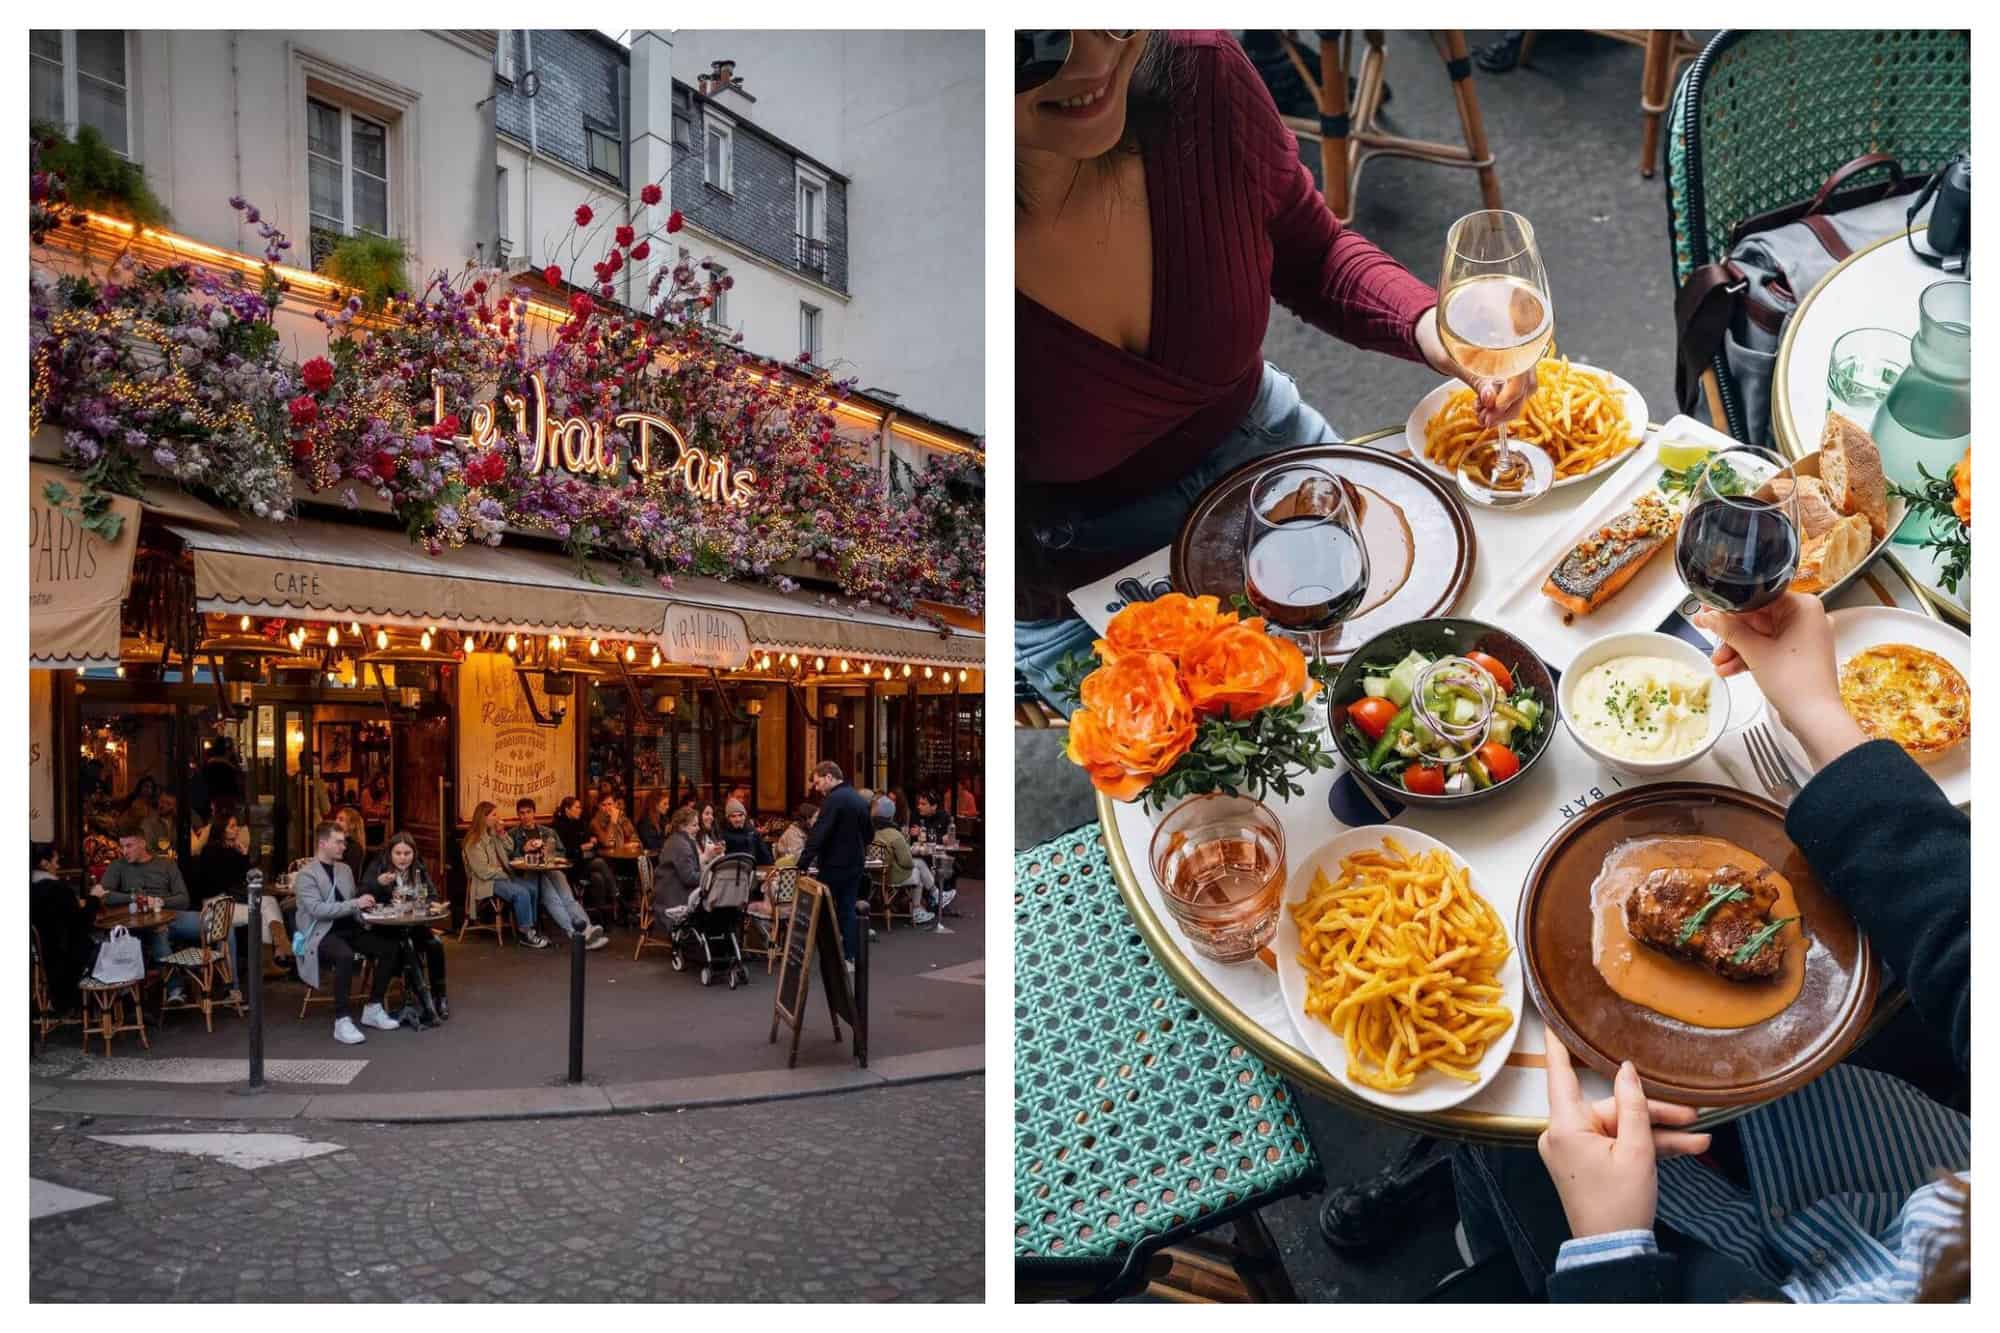 A bustling cafe, Le Vrai Paris with blooms of flowers around its sign and warm lighting. A couple sitting at a table full of French food and wine outside a cafe.